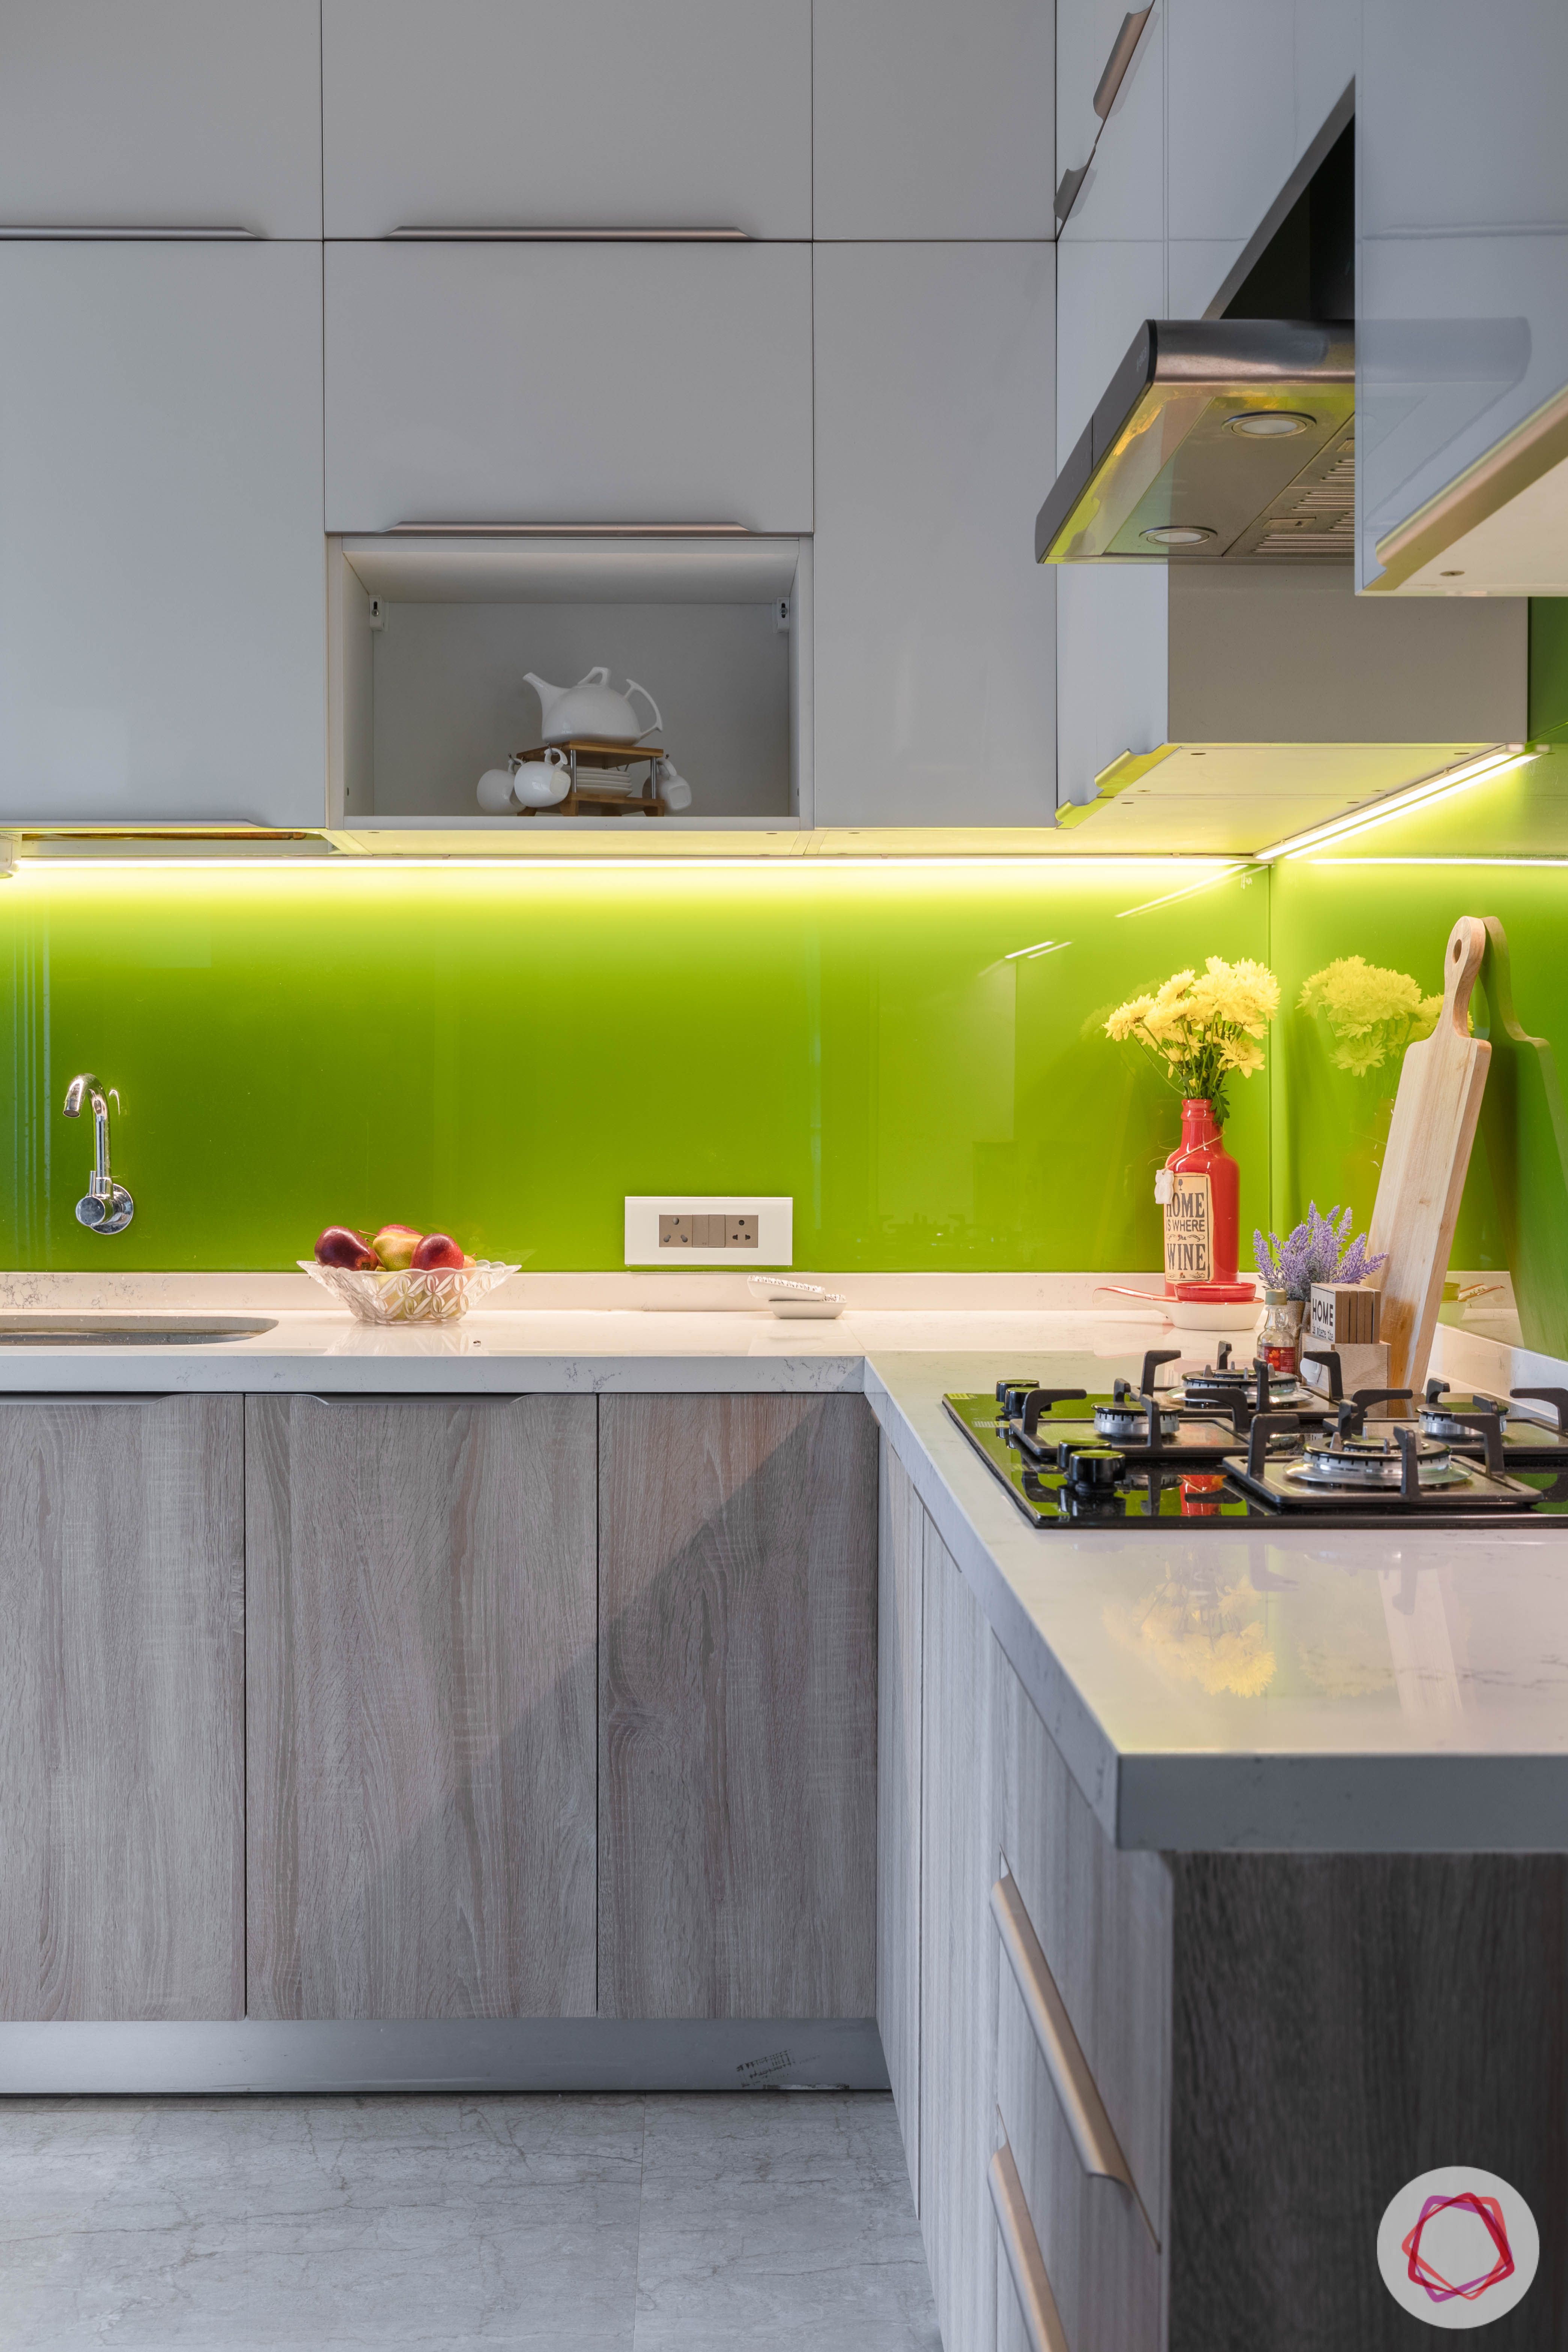 wall-tiles-design-back-painted-glass-green-cabinets-led-lights
